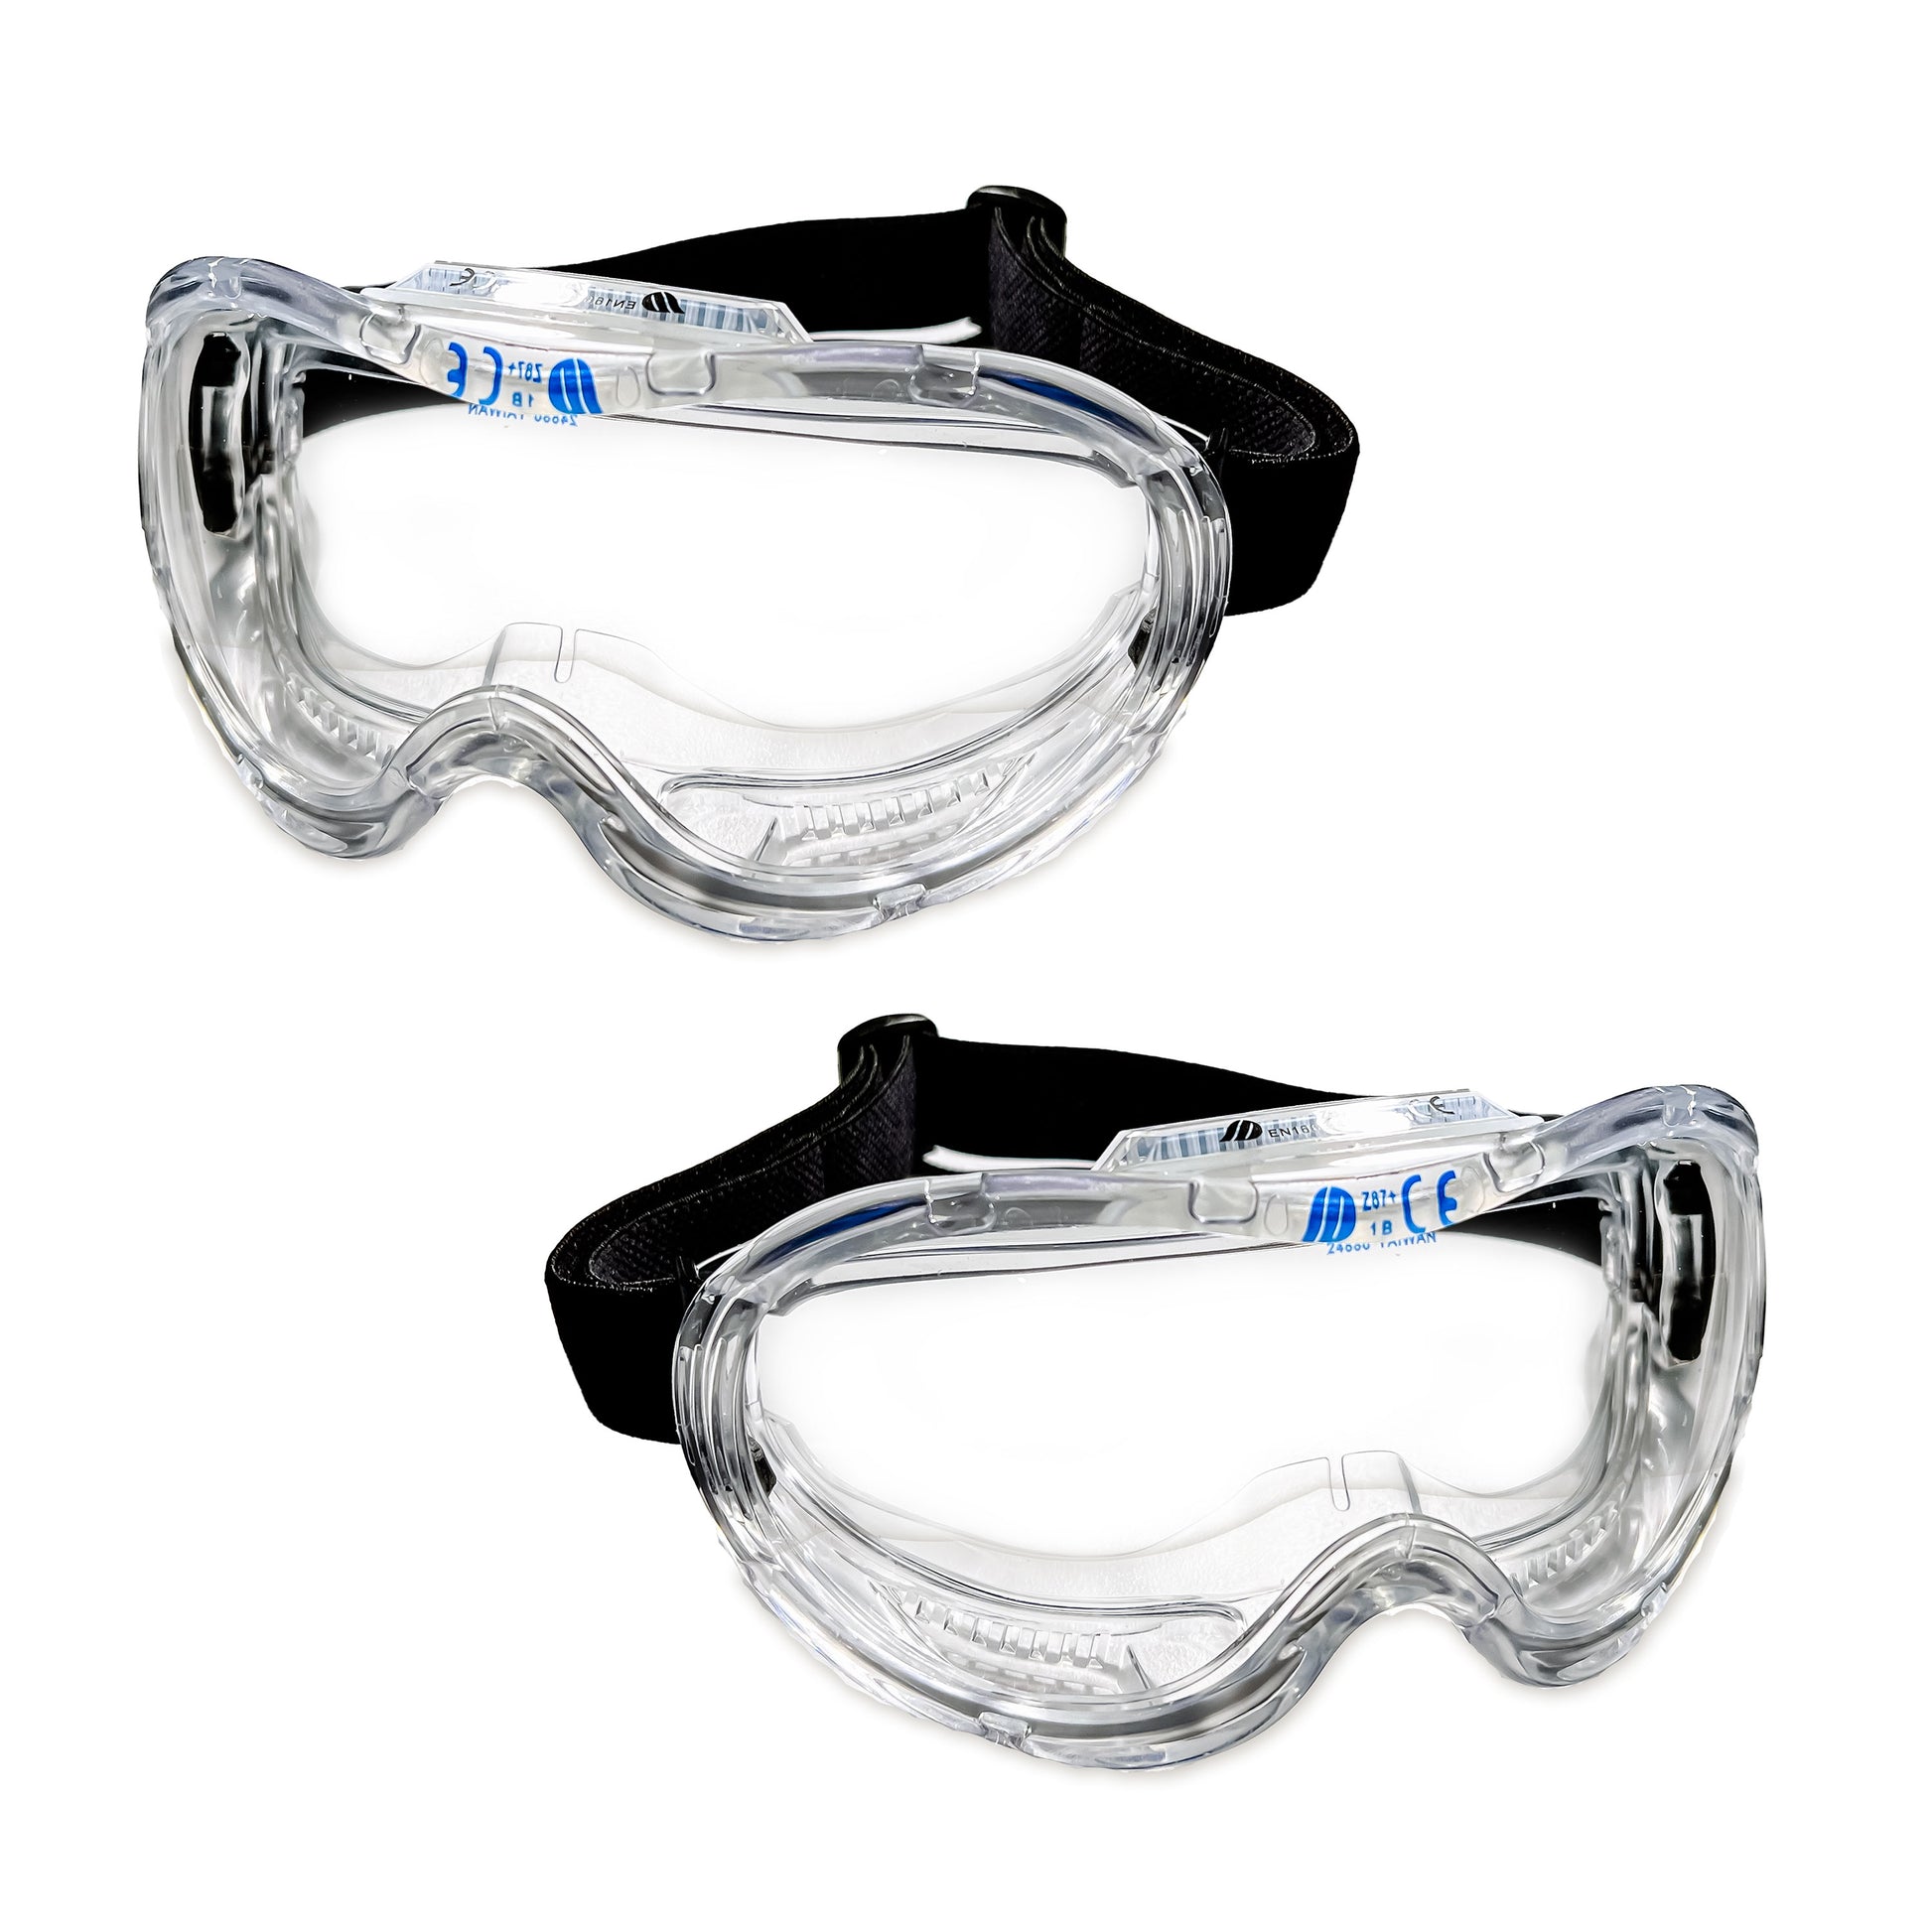 2 Packs Safety Eye Protection Anti Fog Anti Scratch Impact Goggles Fit Over Most Prescription Spectacle